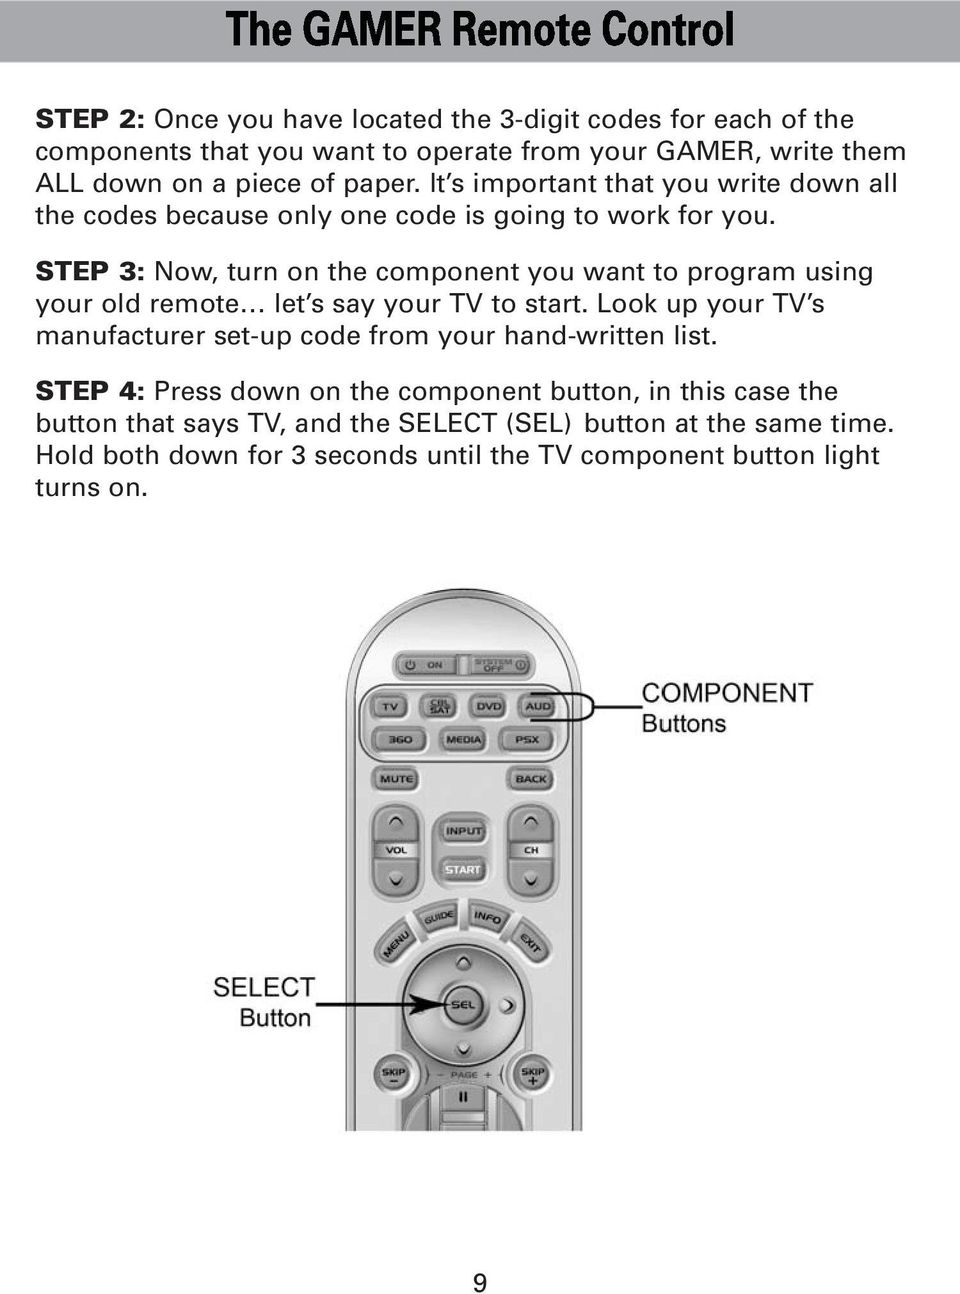 STEP 3: Now, turn on the component you want to program using your old remote let s say your TV to start.